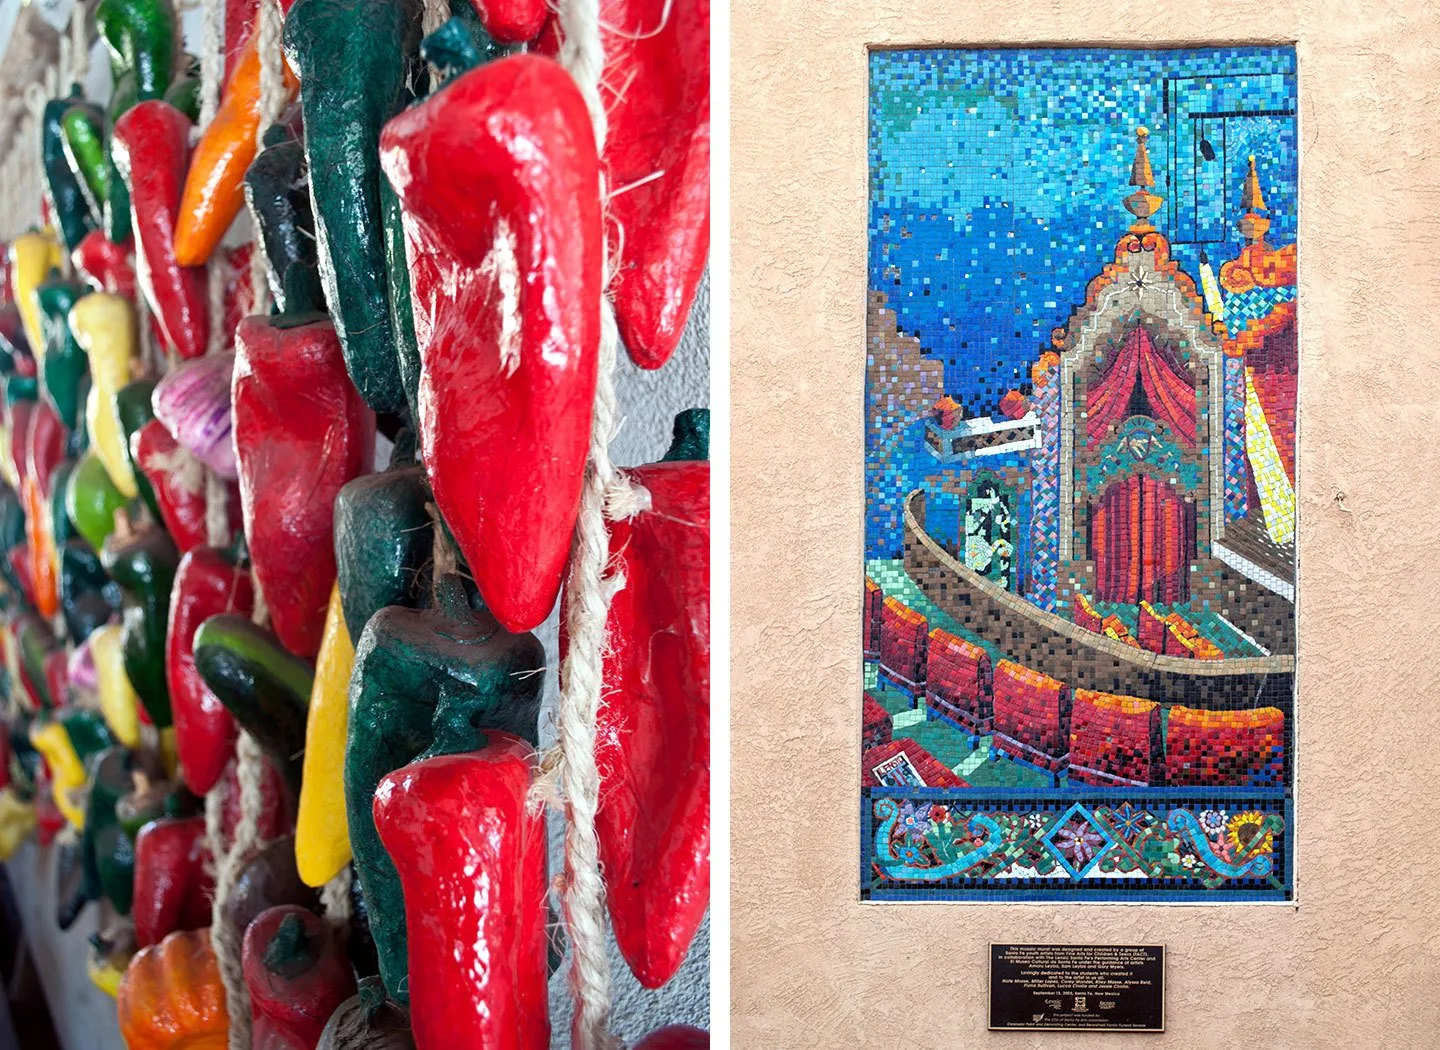 Colourful painted chilies and mosaics in Santa Fe, New Mexico